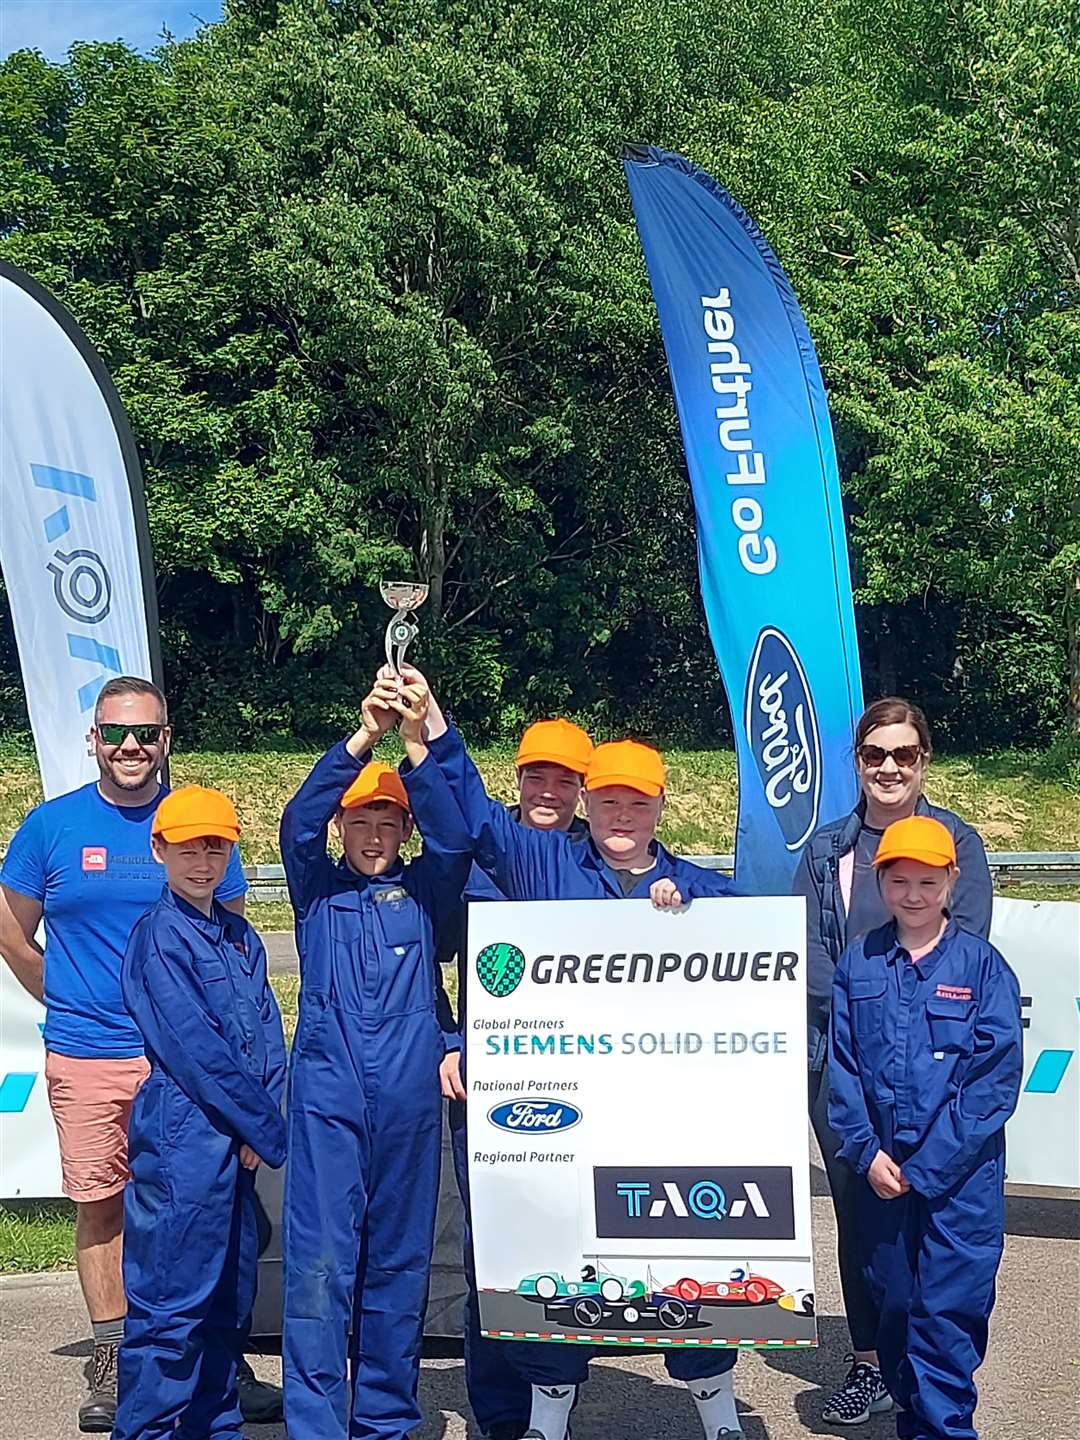 The team were named as overall champions after taking first place in the drag, slalom and spring races.